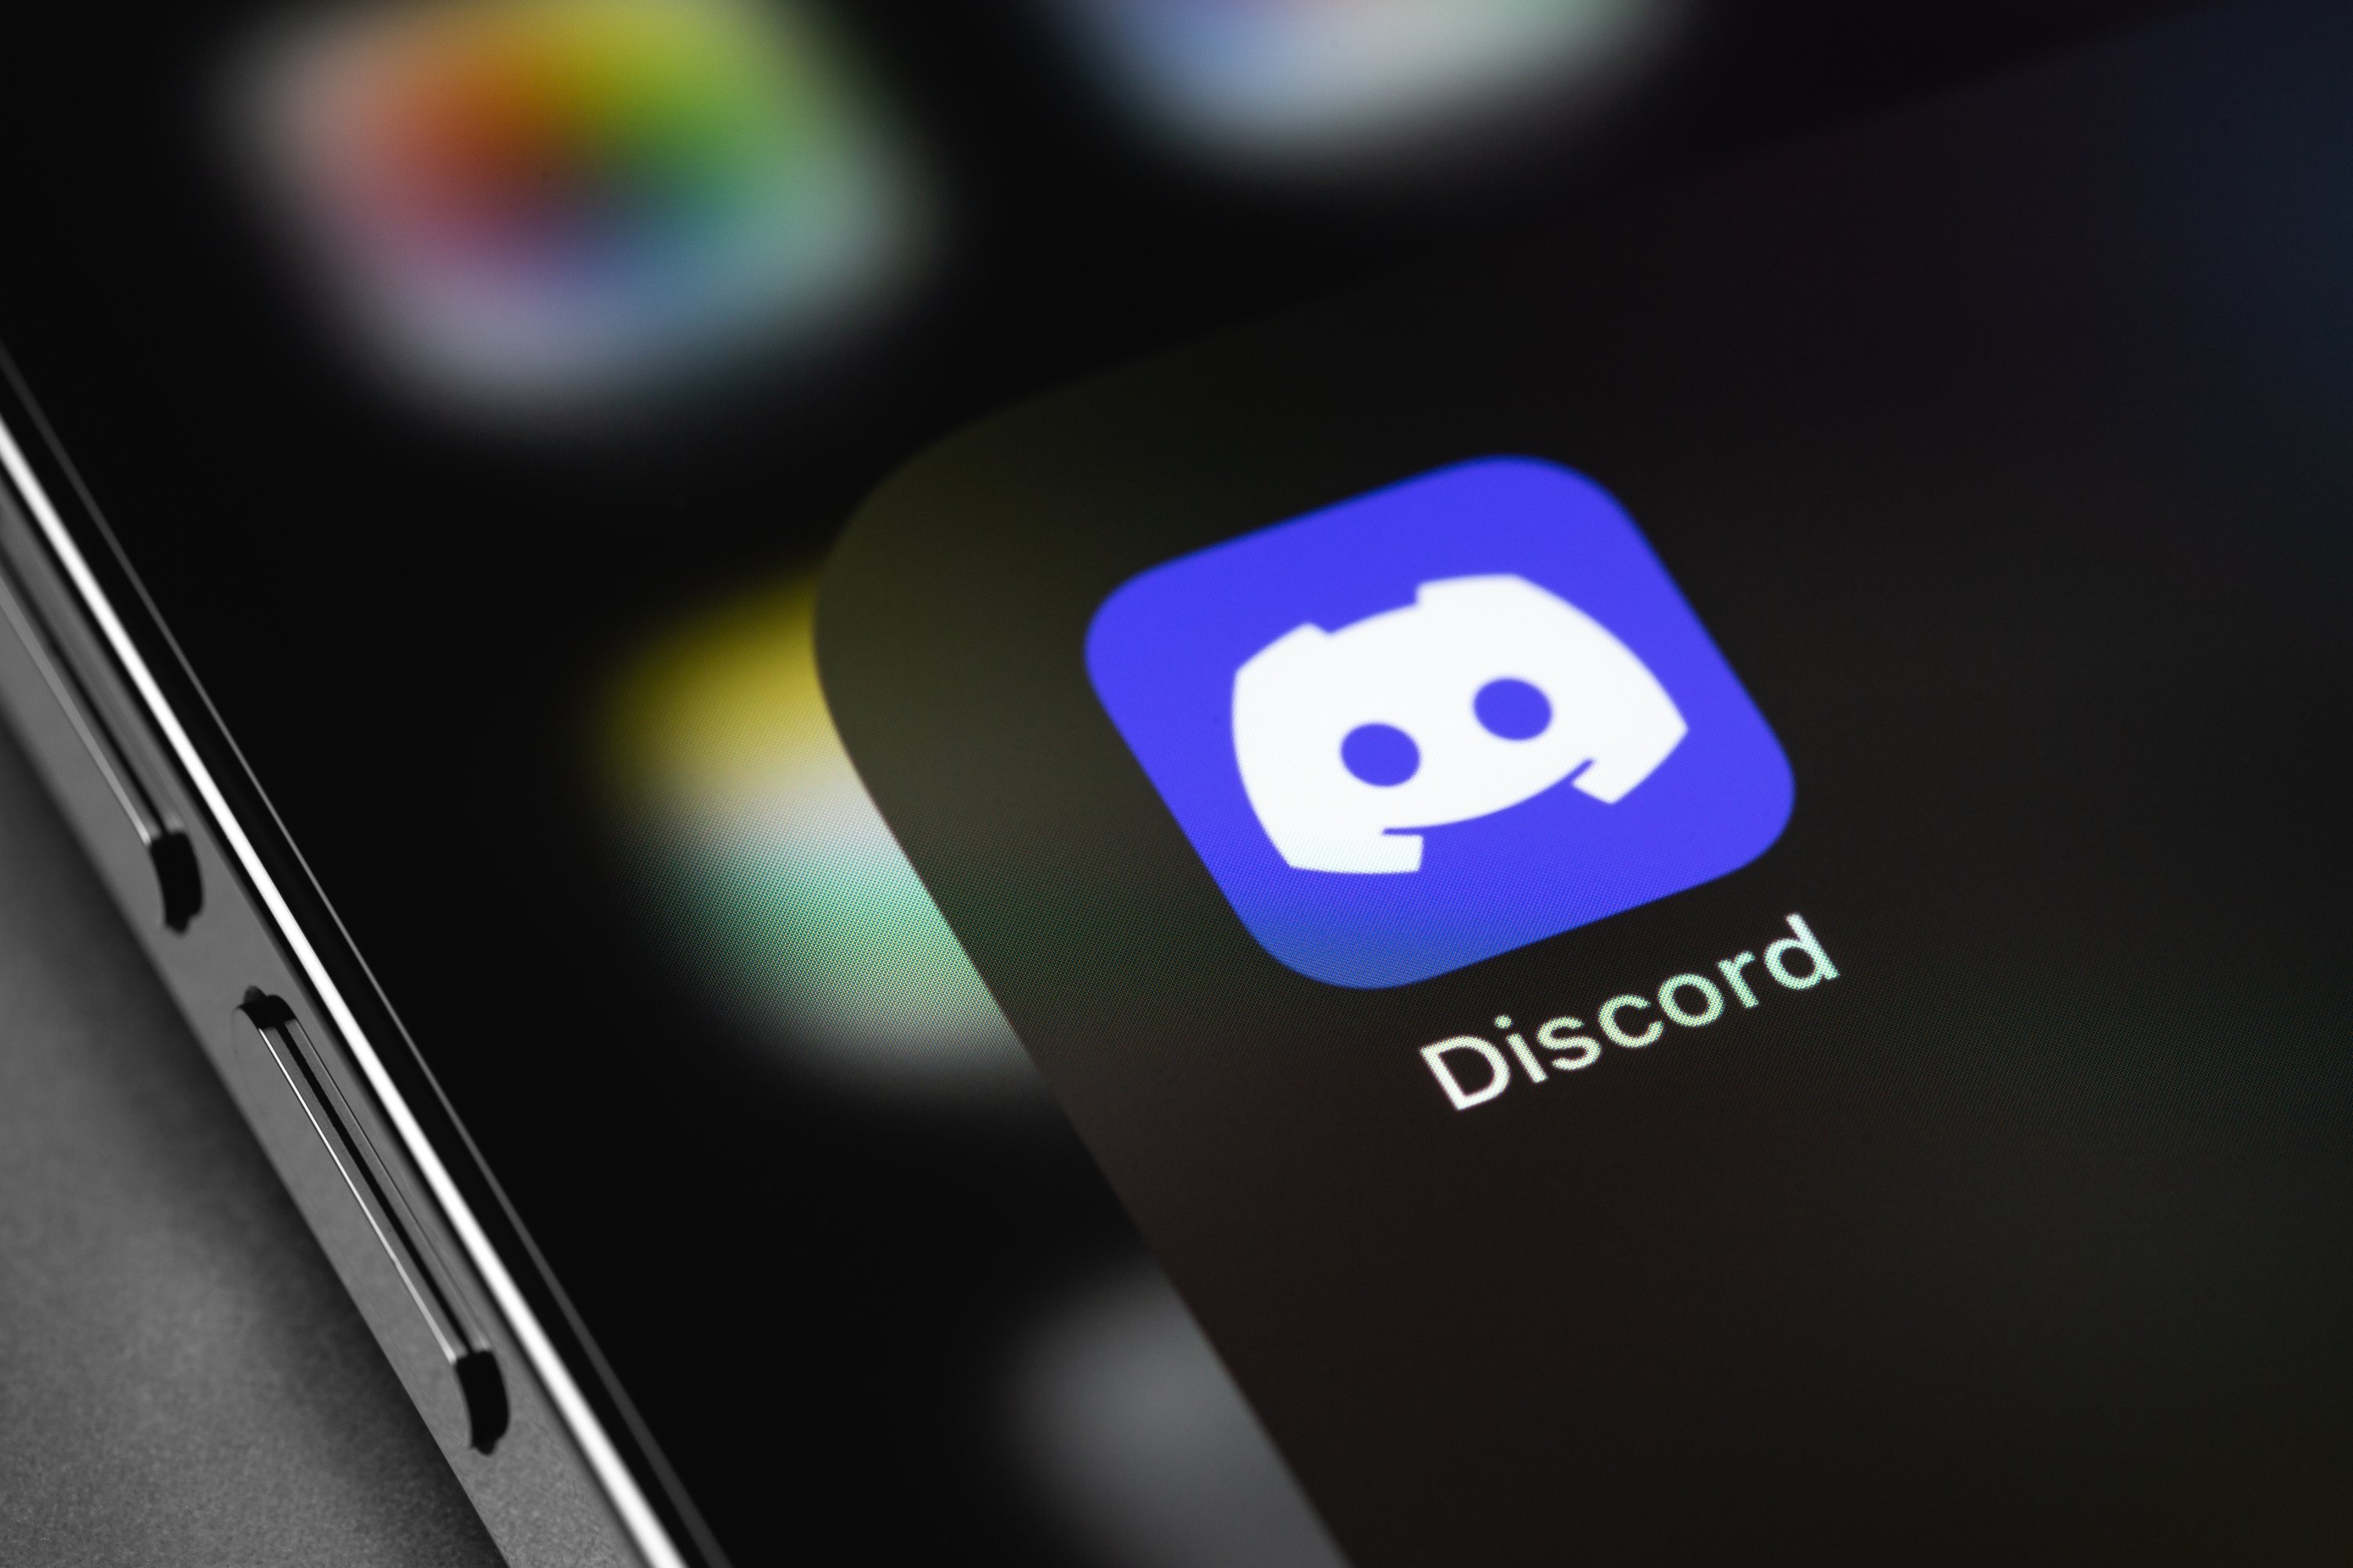 What is Discord? The App at the Center of US Military Documents